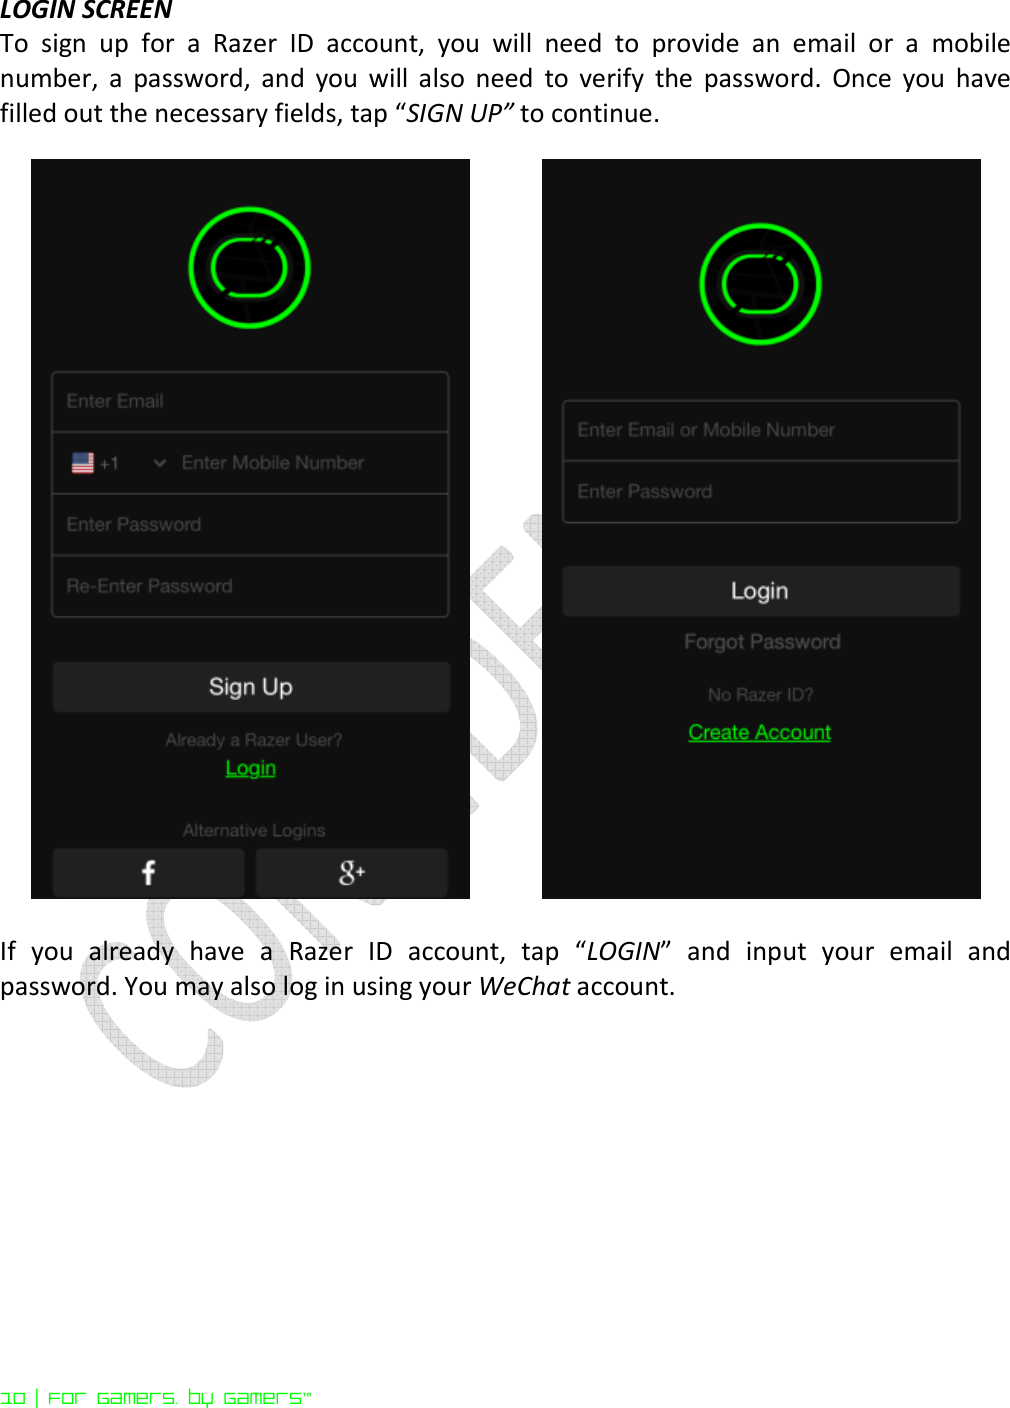  10 | For gamers. by gamers™ LOGIN SCREEN To  sign  up  for  a  Razer  ID  account,  you  will  need  to  provide  an  email  or  a  mobile number,  a  password,  and  you  will  also  need  to  verify  the  password.  Once  you  have filled out the necessary fields, tap “SIGN UP” to continue.      If  you  already  have  a  Razer  ID  account,  tap  “LOGIN”  and  input  your  email  and password. You may also log in using your WeChat account.      